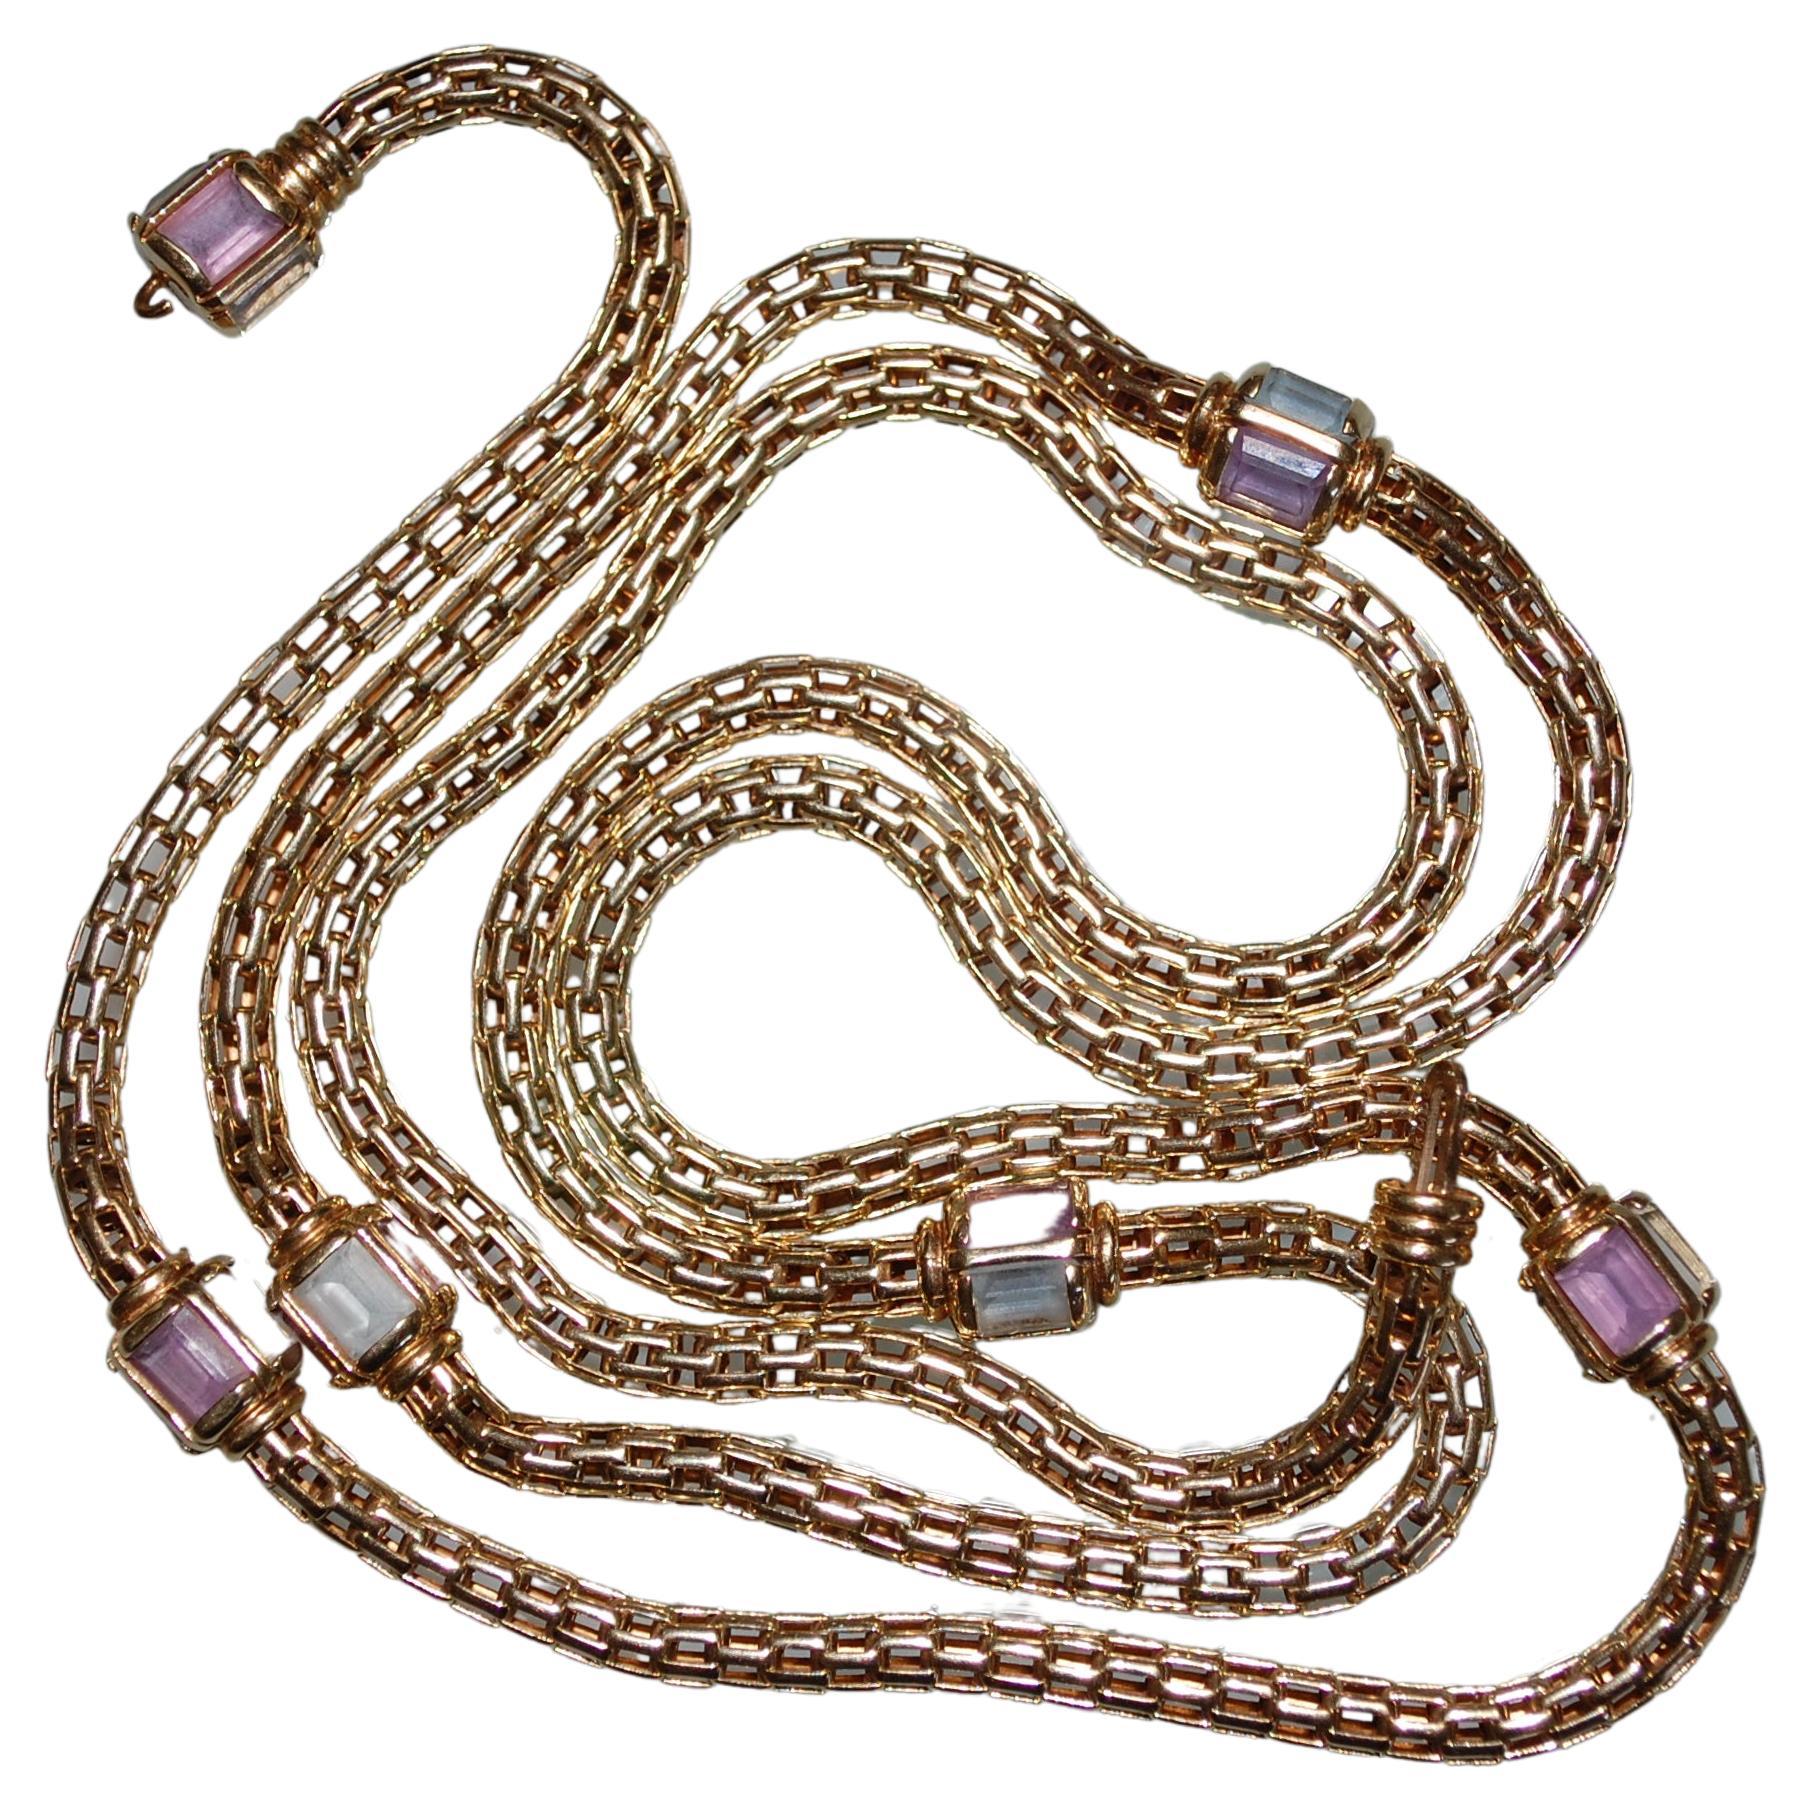 14k Gold Mesh Necklace with Aquamarine and Amethyst In Excellent Condition For Sale In Lake Worth, FL